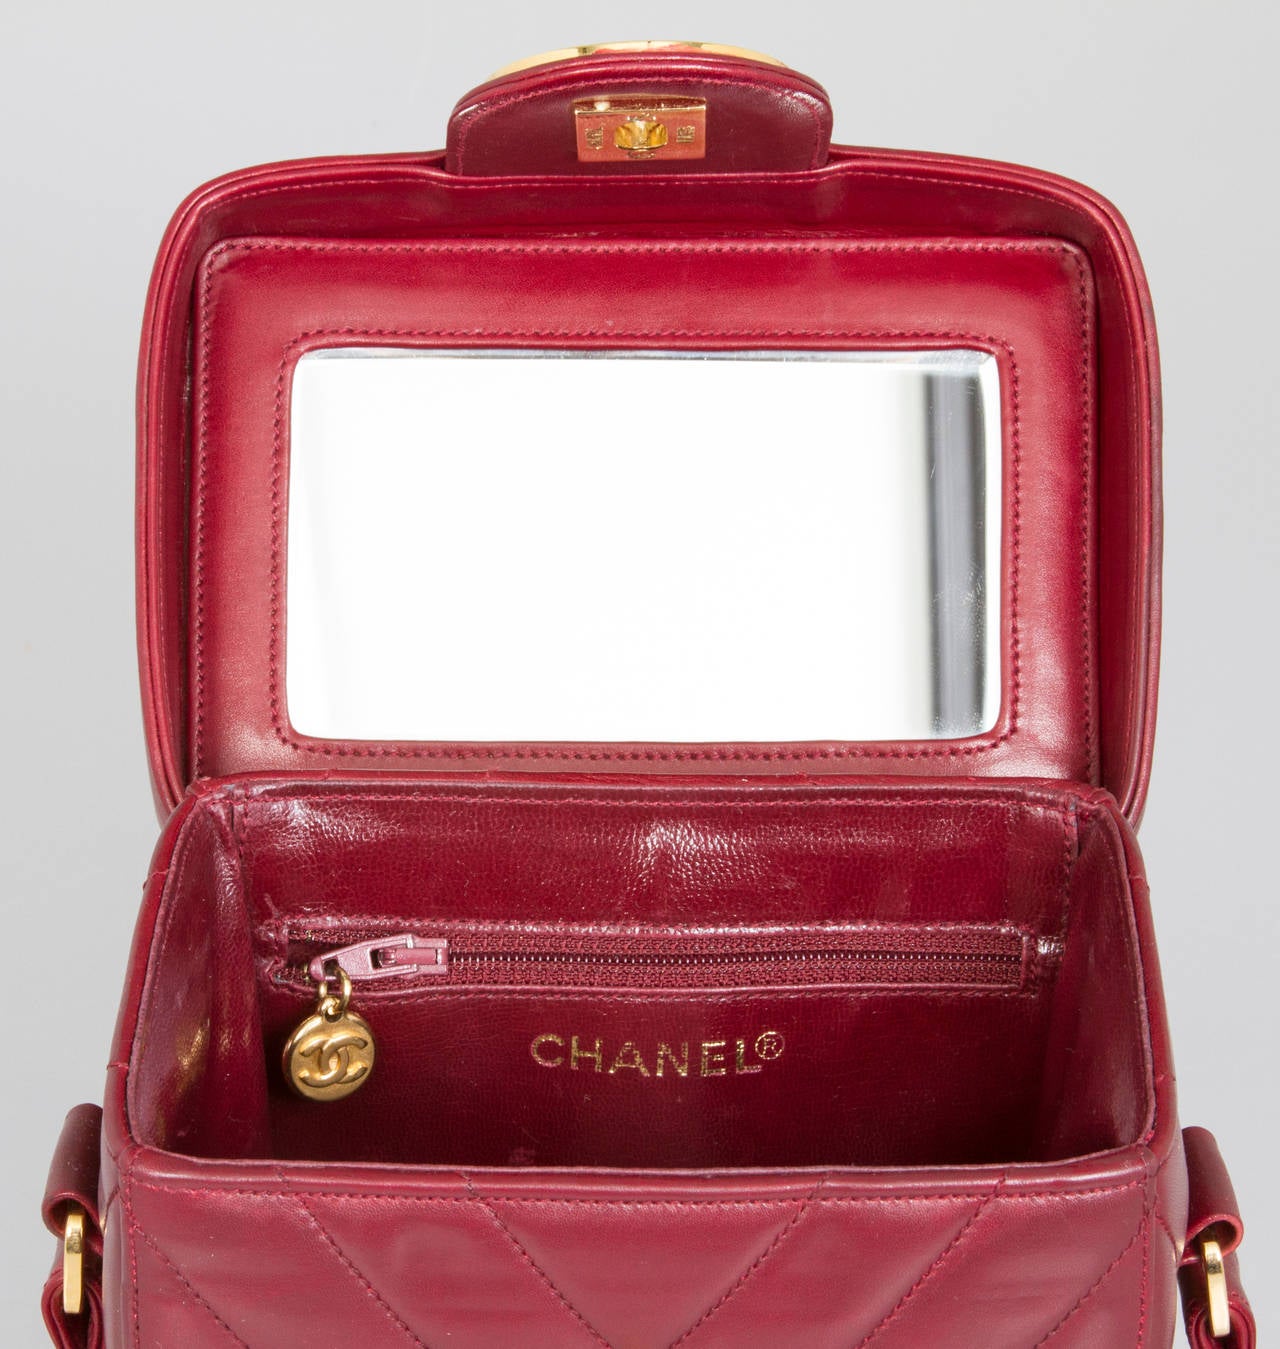 Women's Unusual CHANEL Red Leather Chevron Shoulder Bag